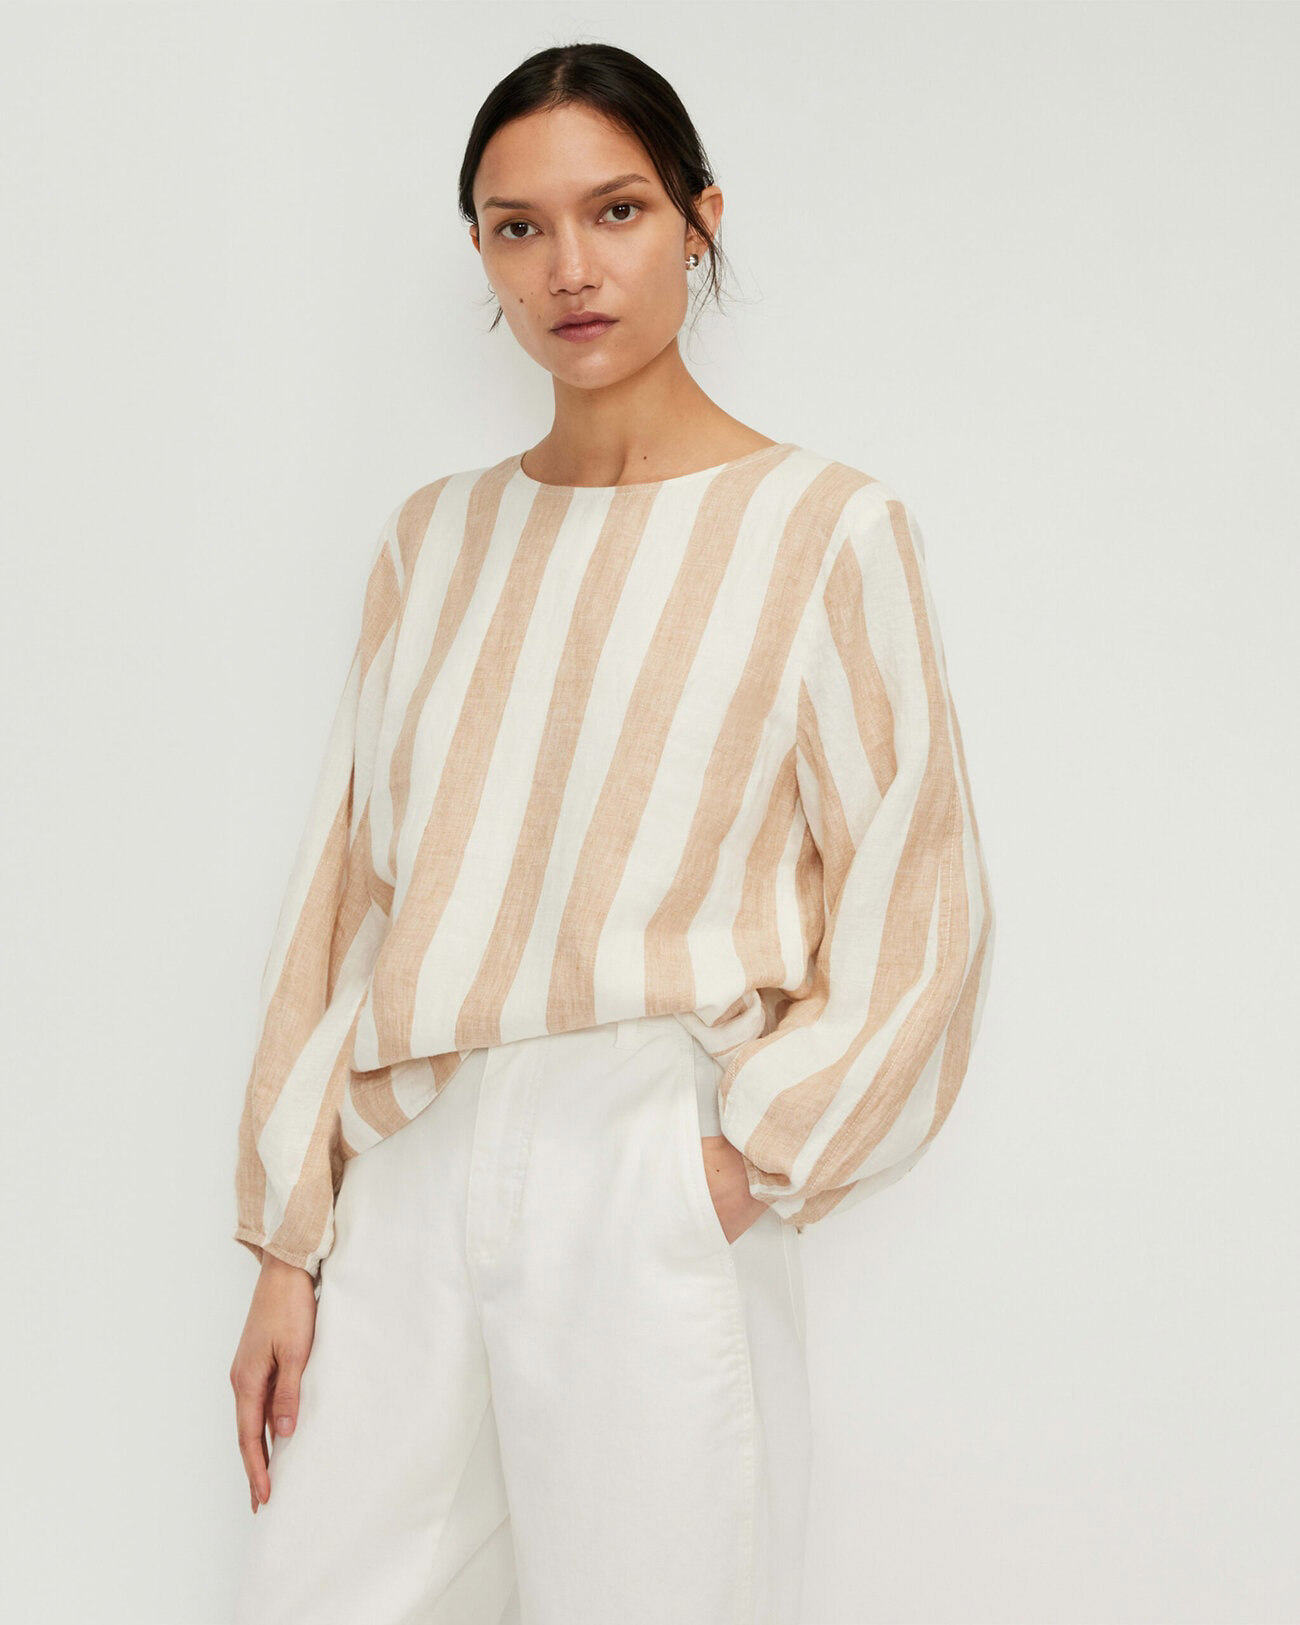 20+ Stores Like Everlane to Elevate Your Ethical Style!